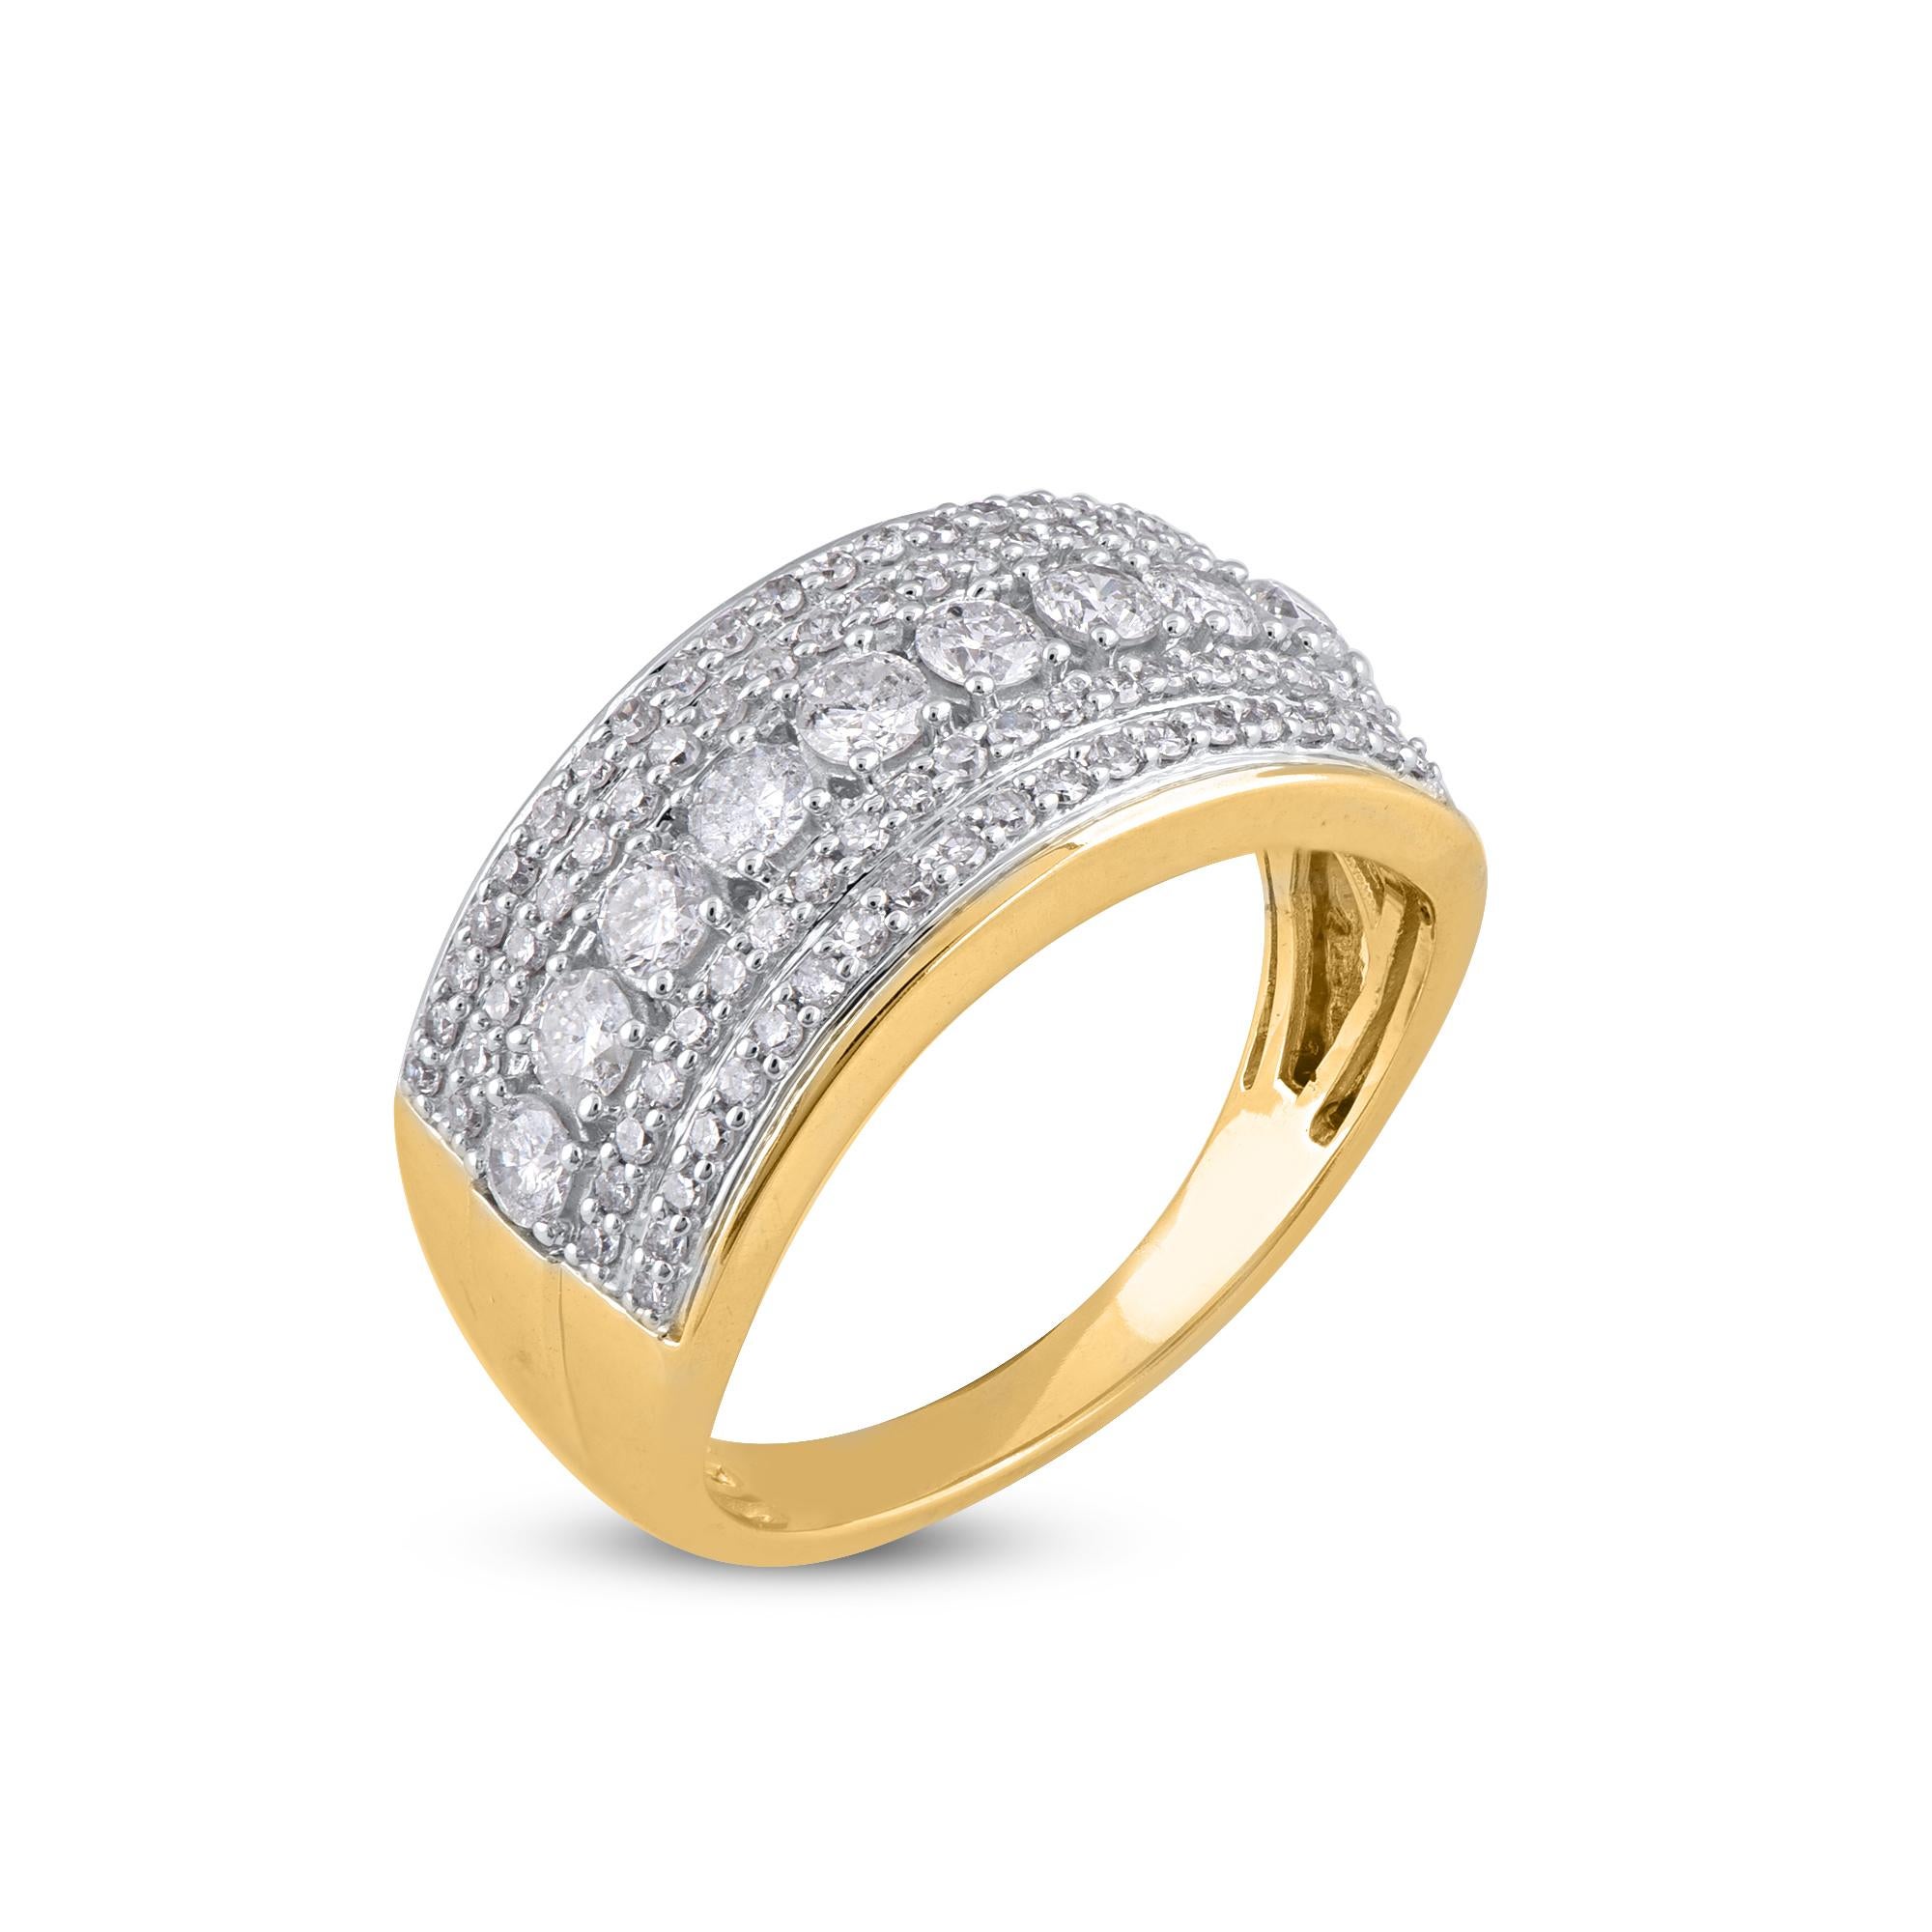 Art Deco TJD 1.0 Carat Round Cut Diamond 14KT Yellow Gold Wedding Band Ring For Sale